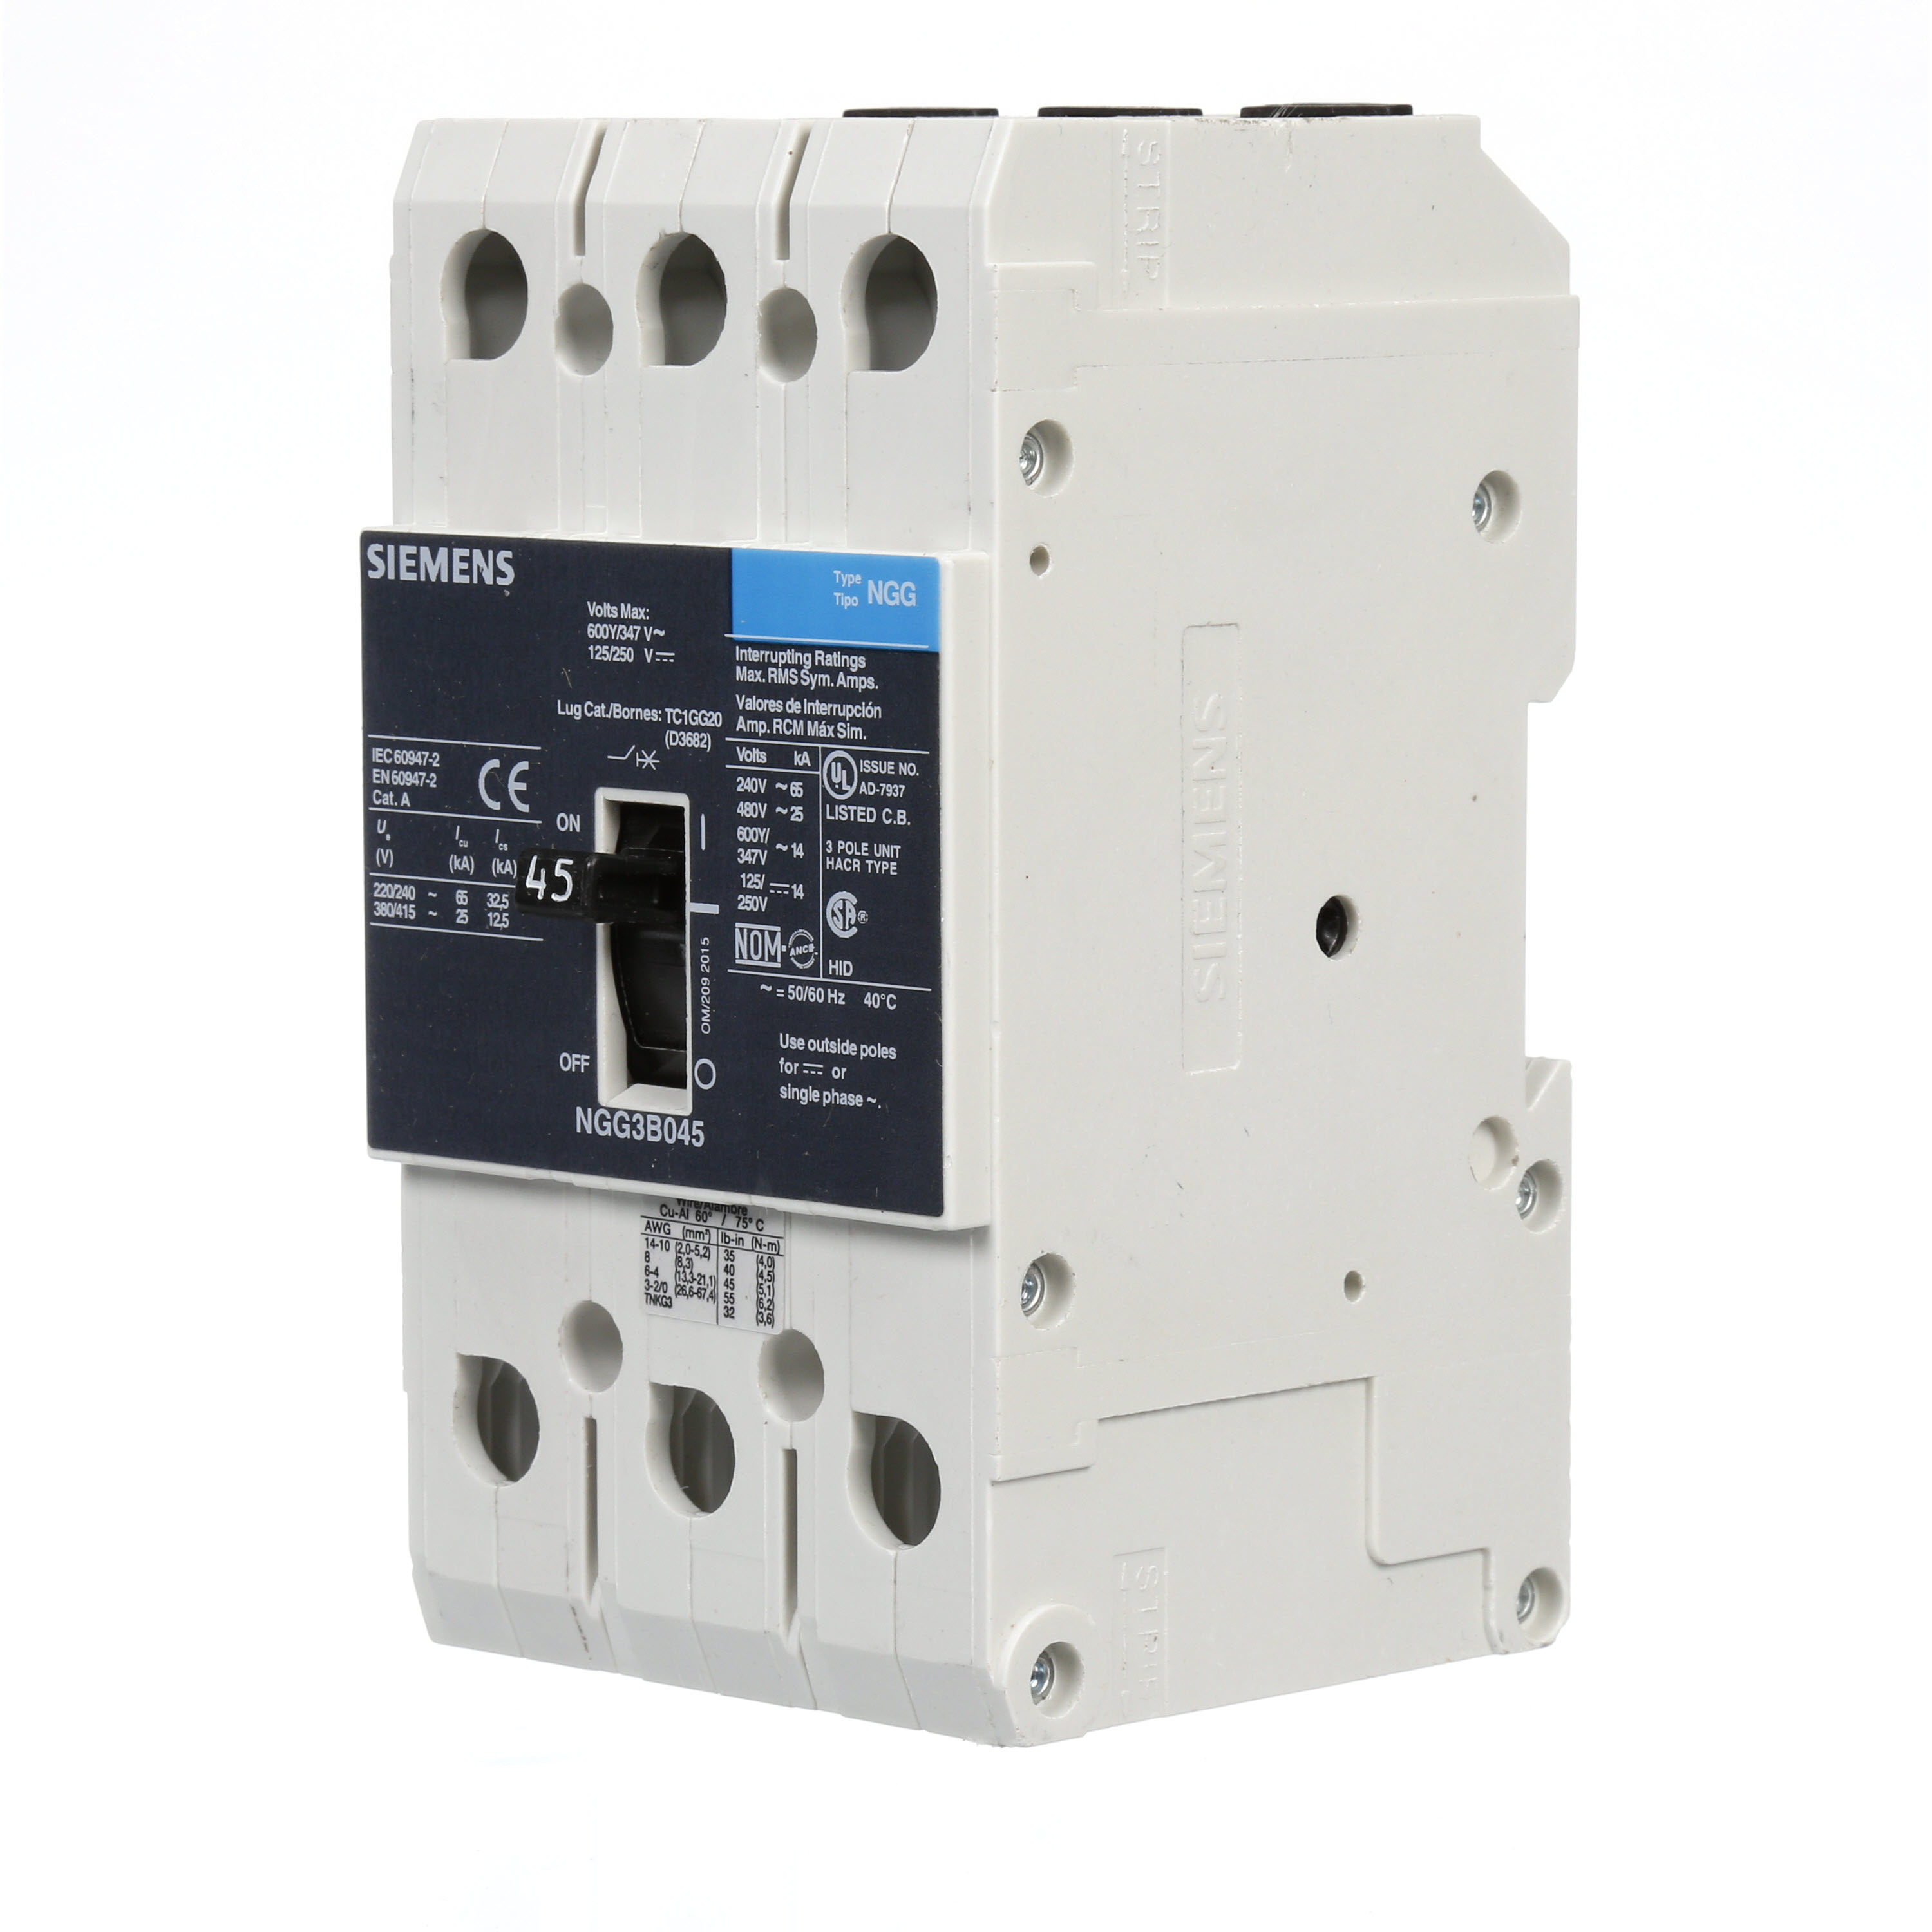 SIEMENS LOW VOLTAGE G FRAME CIRCUIT BREAKER WITH THERMAL - MAGNETIC TRIP. UL LISTED NGG FRAME WITH STANDARD BREAKING CAPACITY. 45A 3-POLE (14KAIC AT 600Y/347V)(25KAIC AT 480V). SPECIAL FEATURES MOUNTS ON DIN RAIL / SCREW, LINE AND LOAD SIDE LUGS (TC1GG20) WIRE RANGE 8 - 1/0 AWS (CU/AL). DIMENSIONS (W x H x D) IN 3 x 5.4 x 2.8.